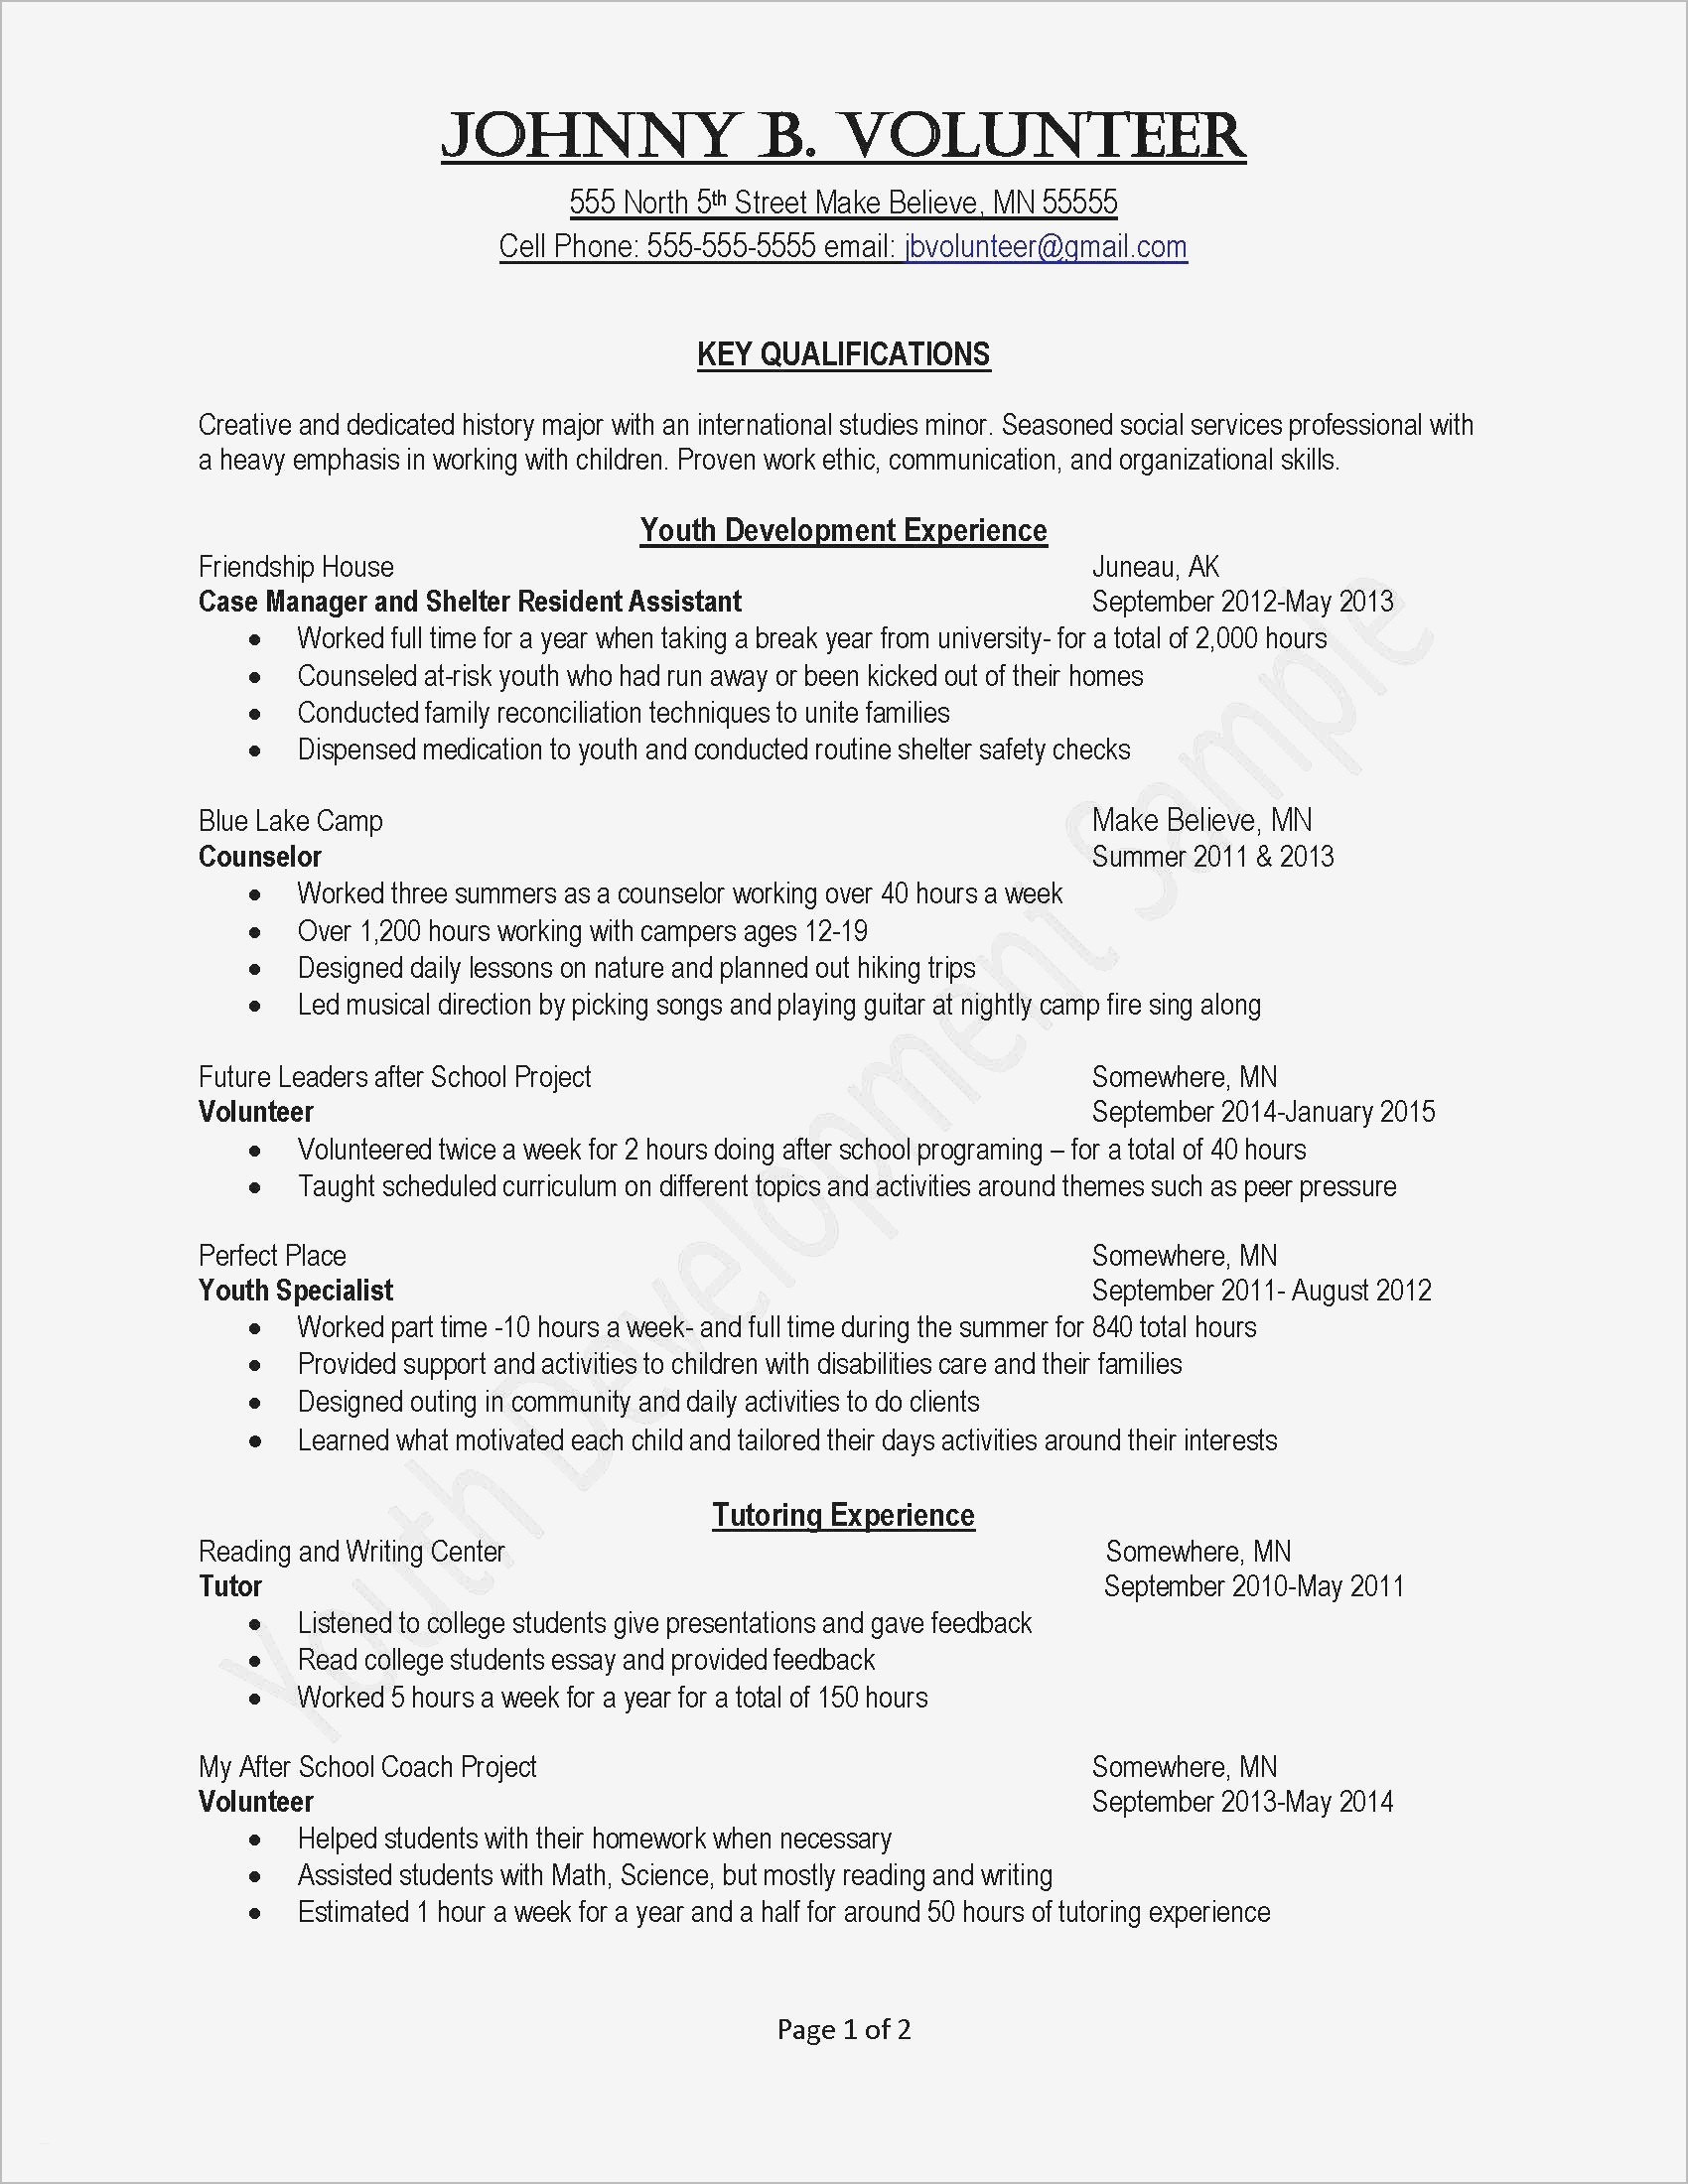 Free foreclosure Letter Template - Create Cover Letter for Resume Unique Job Fer Letter Template Us